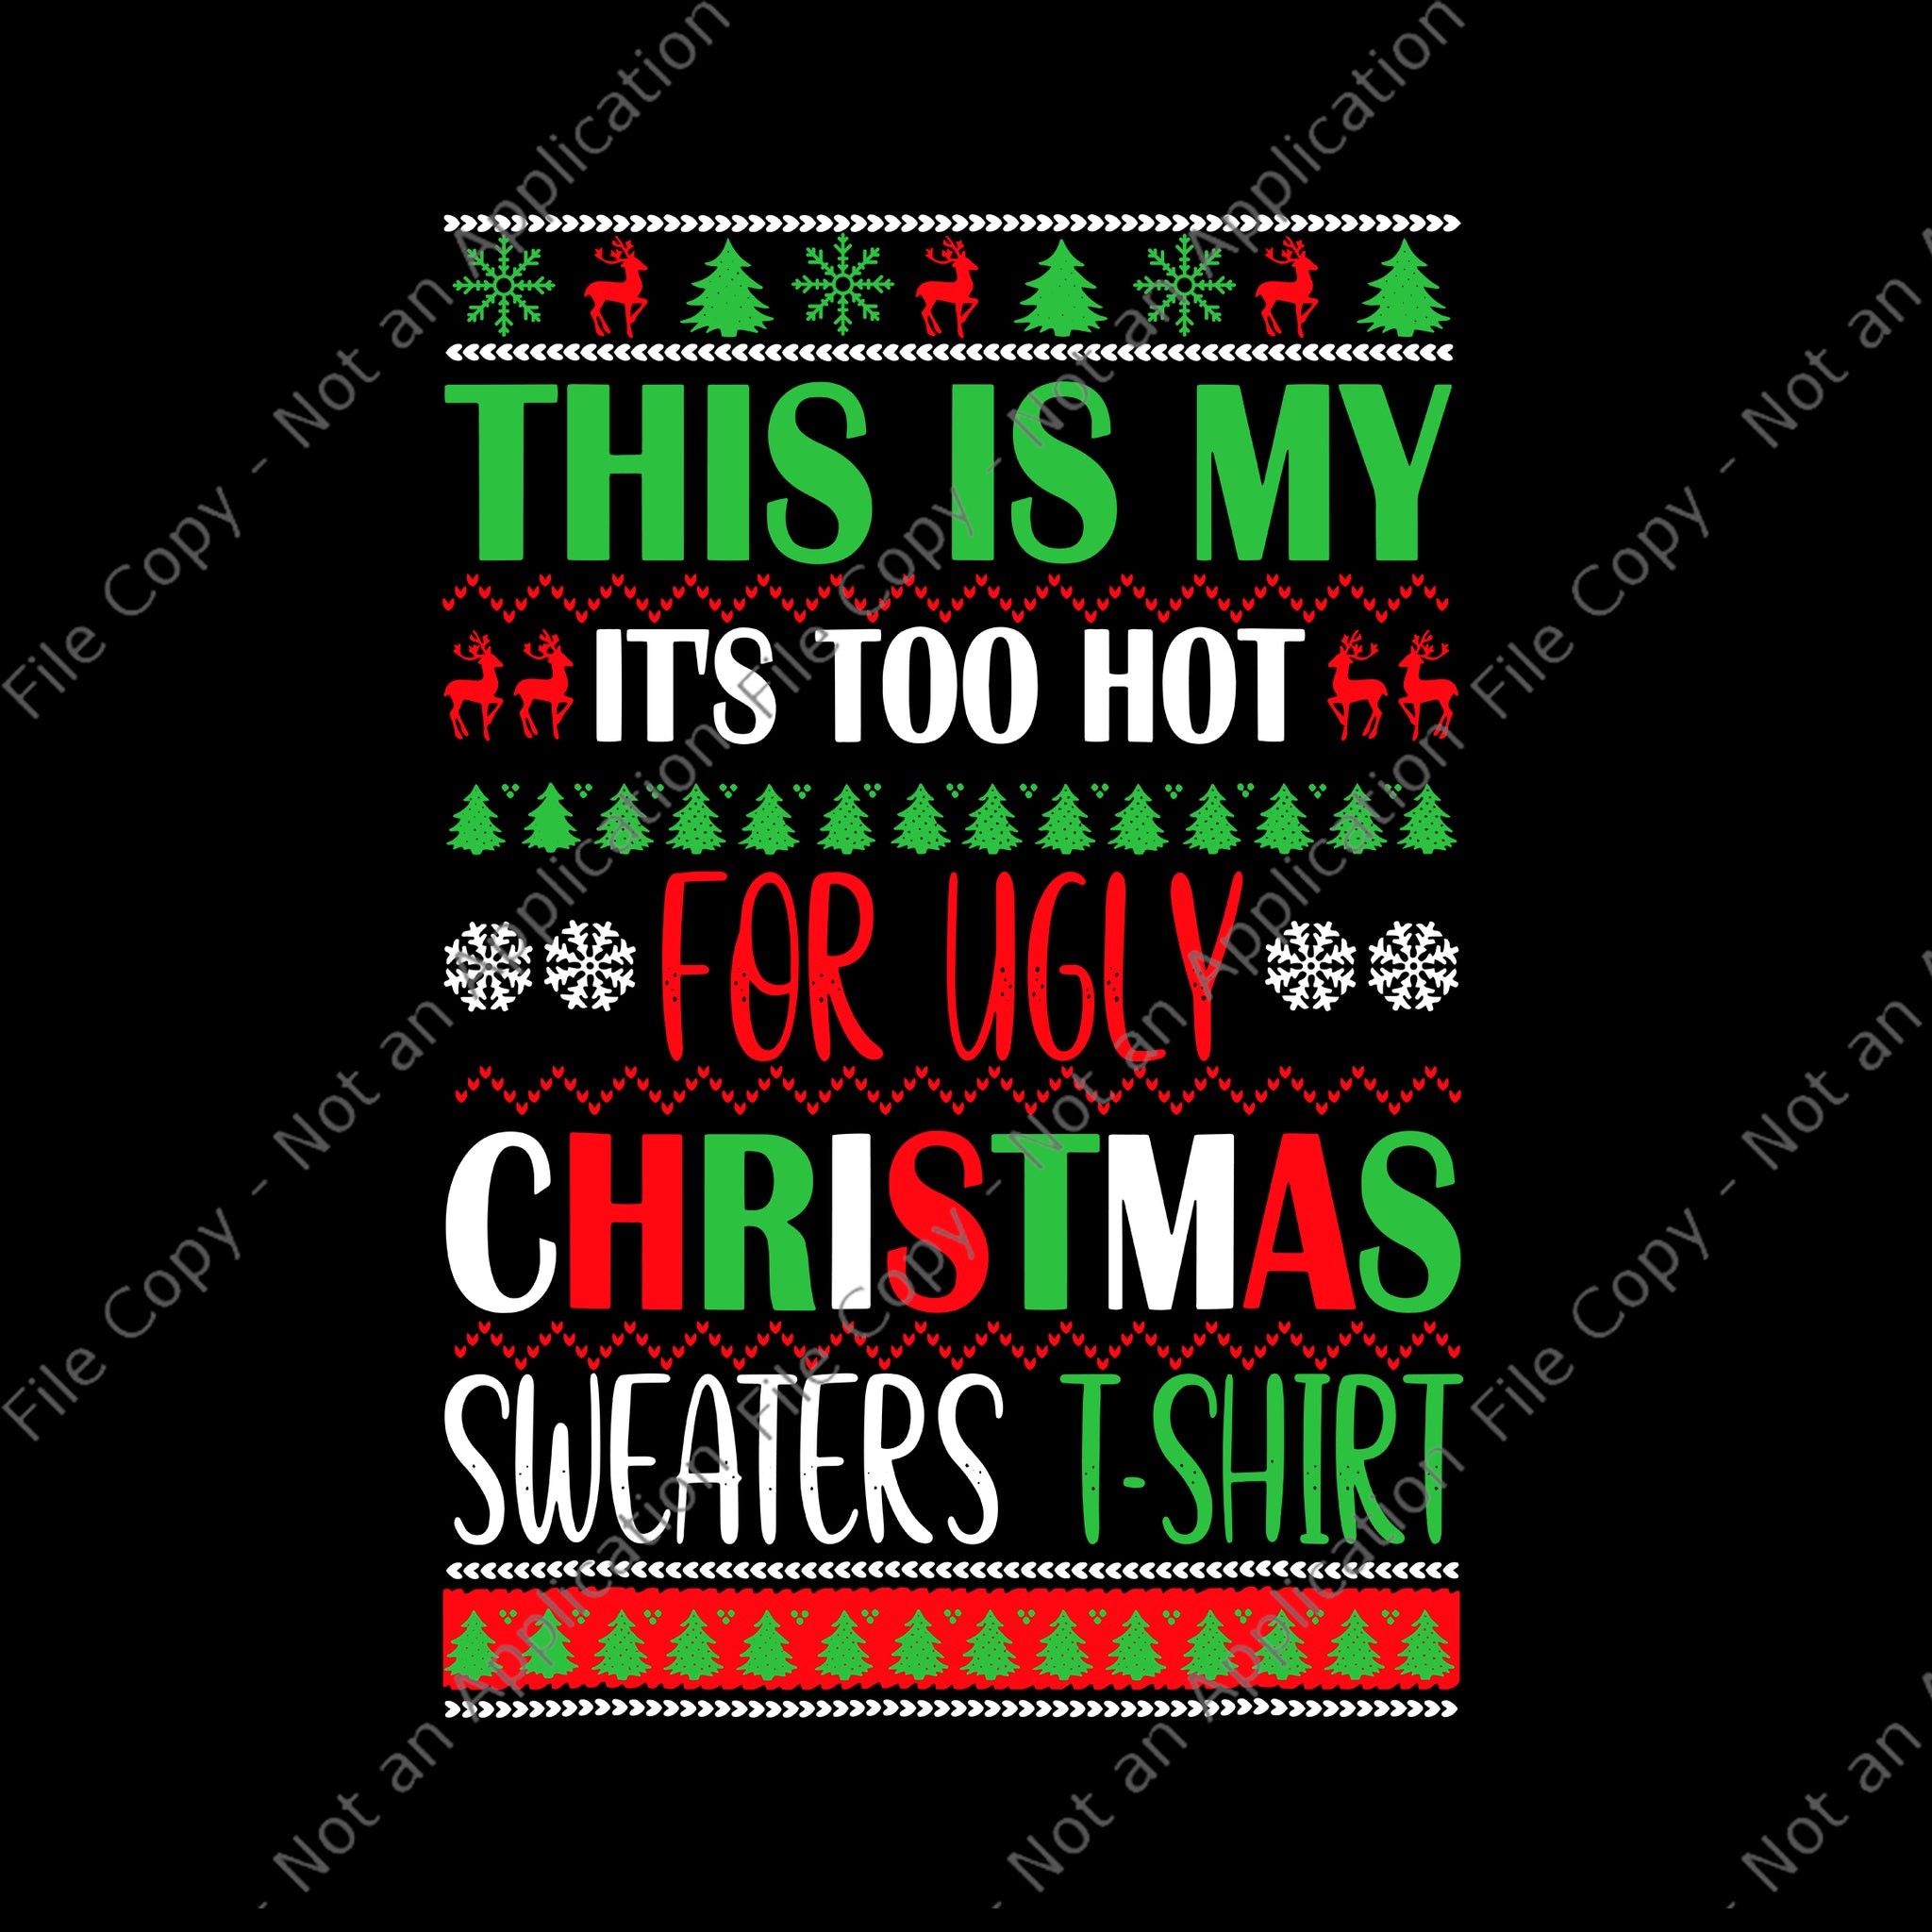 This Is My It's Too Hot For Ugly Christmas Sweaters Shirt Svg, Ugly Christmas Svg, Christmas Svg, ReinDeer Svg, Tree Christma Svg